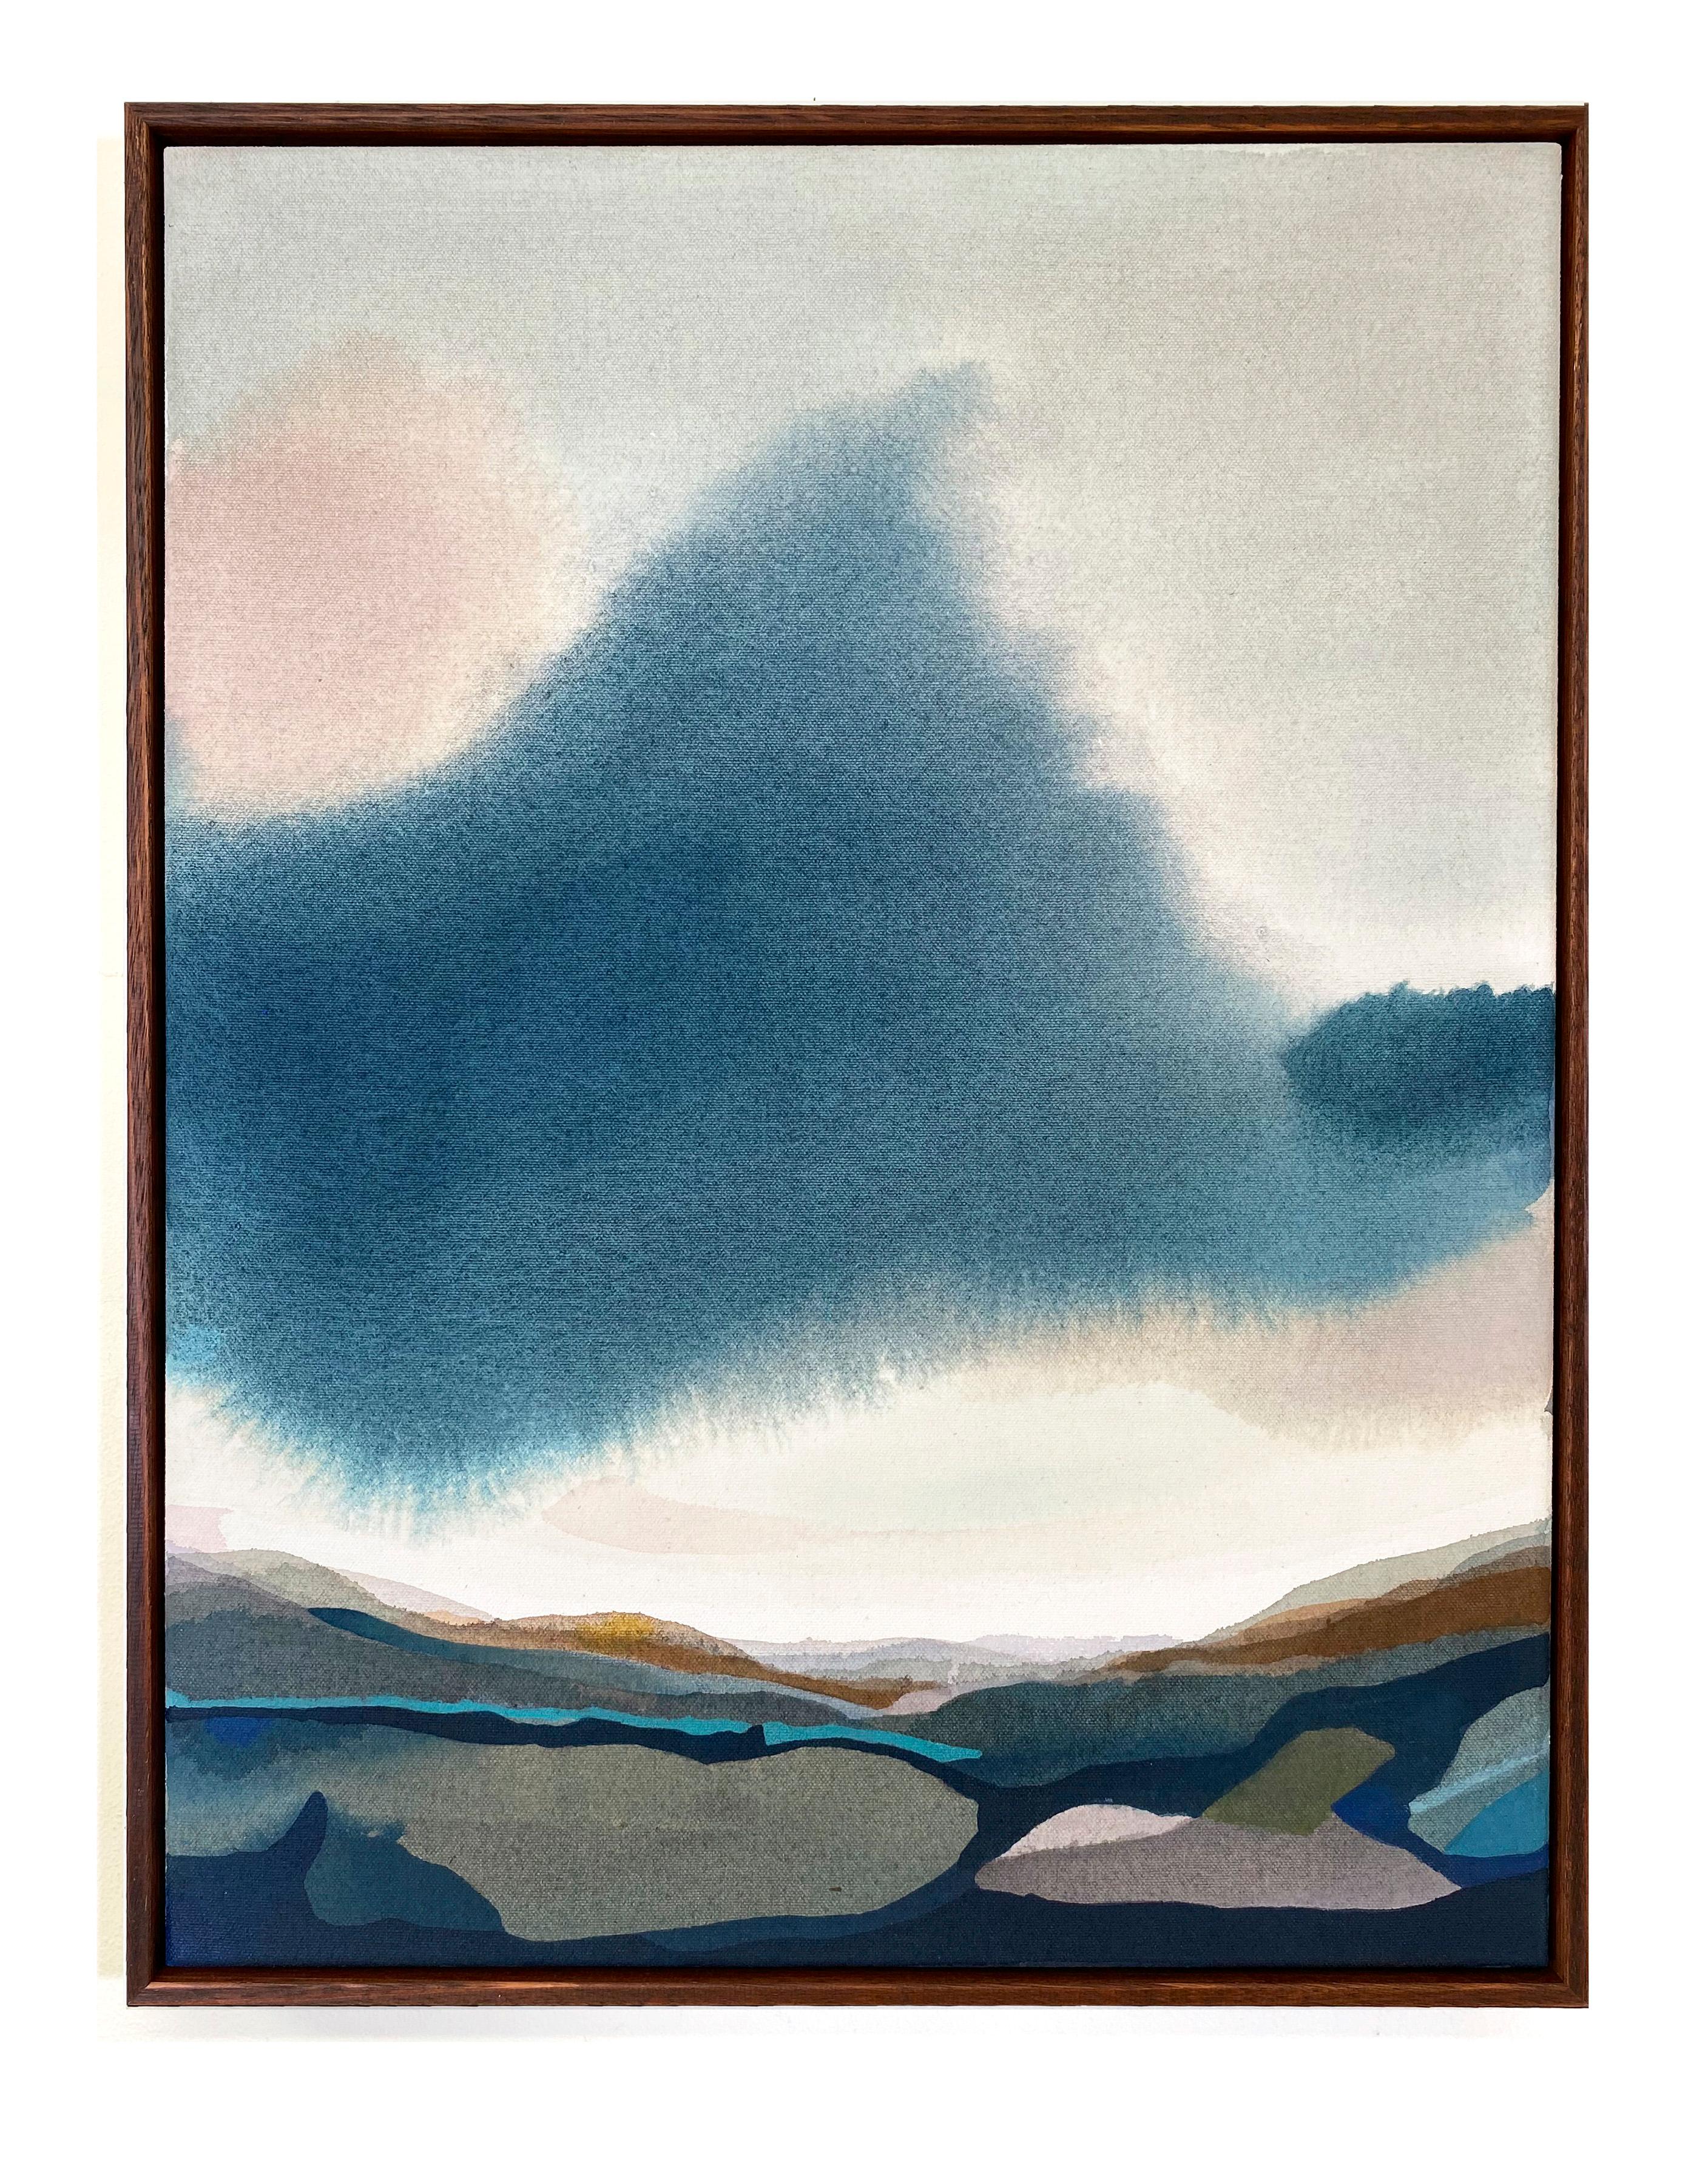 Quiet Composition #3, contemporary, framed landscape painting by Stefan Gevers